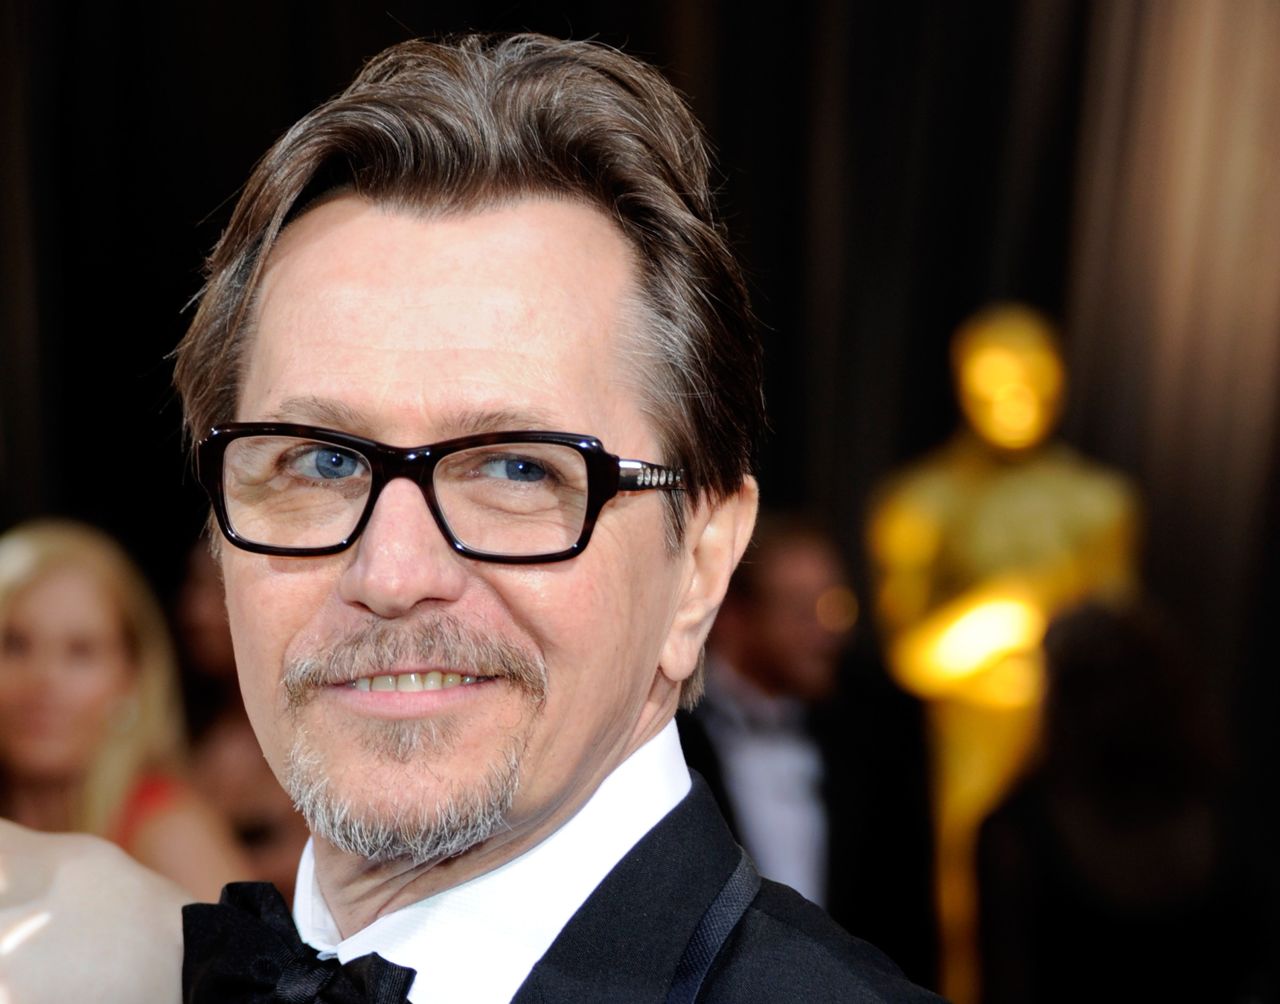 Gary Oldman was so remorseful for his remarks about Jewish people and Hollywood that<a href="http://www.cnn.com/2014/06/26/showbiz/celebrity-news-gossip/gary-oldman-rant-playboy-apology-kimmel/index.html?iref=allsearch"> he apologized twice</a>. 